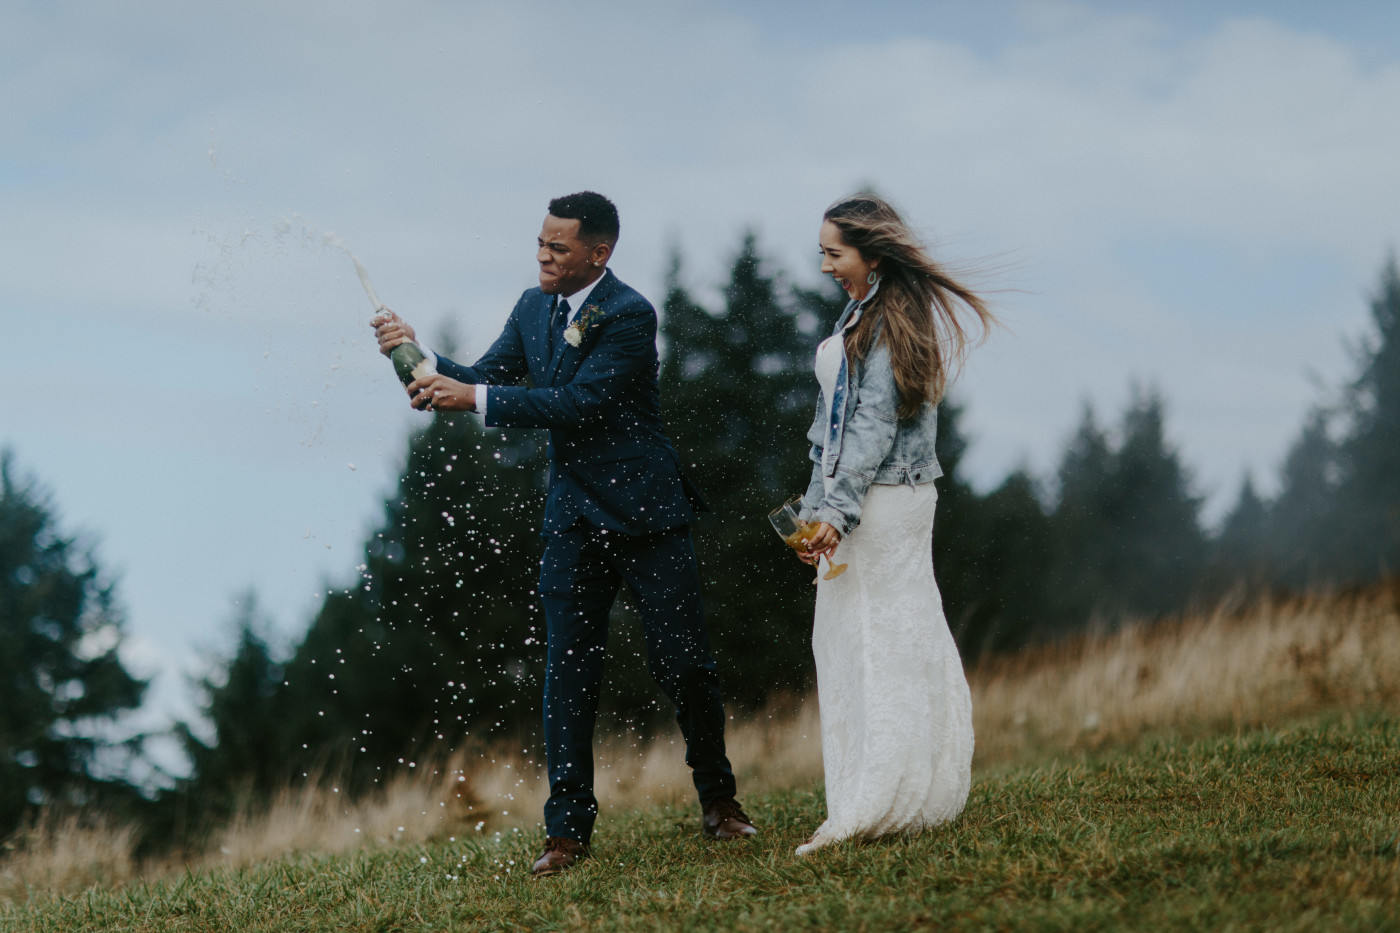 Deandre shakes up the champagne. Elopement photography at Mount Hood by Sienna Plus Josh.